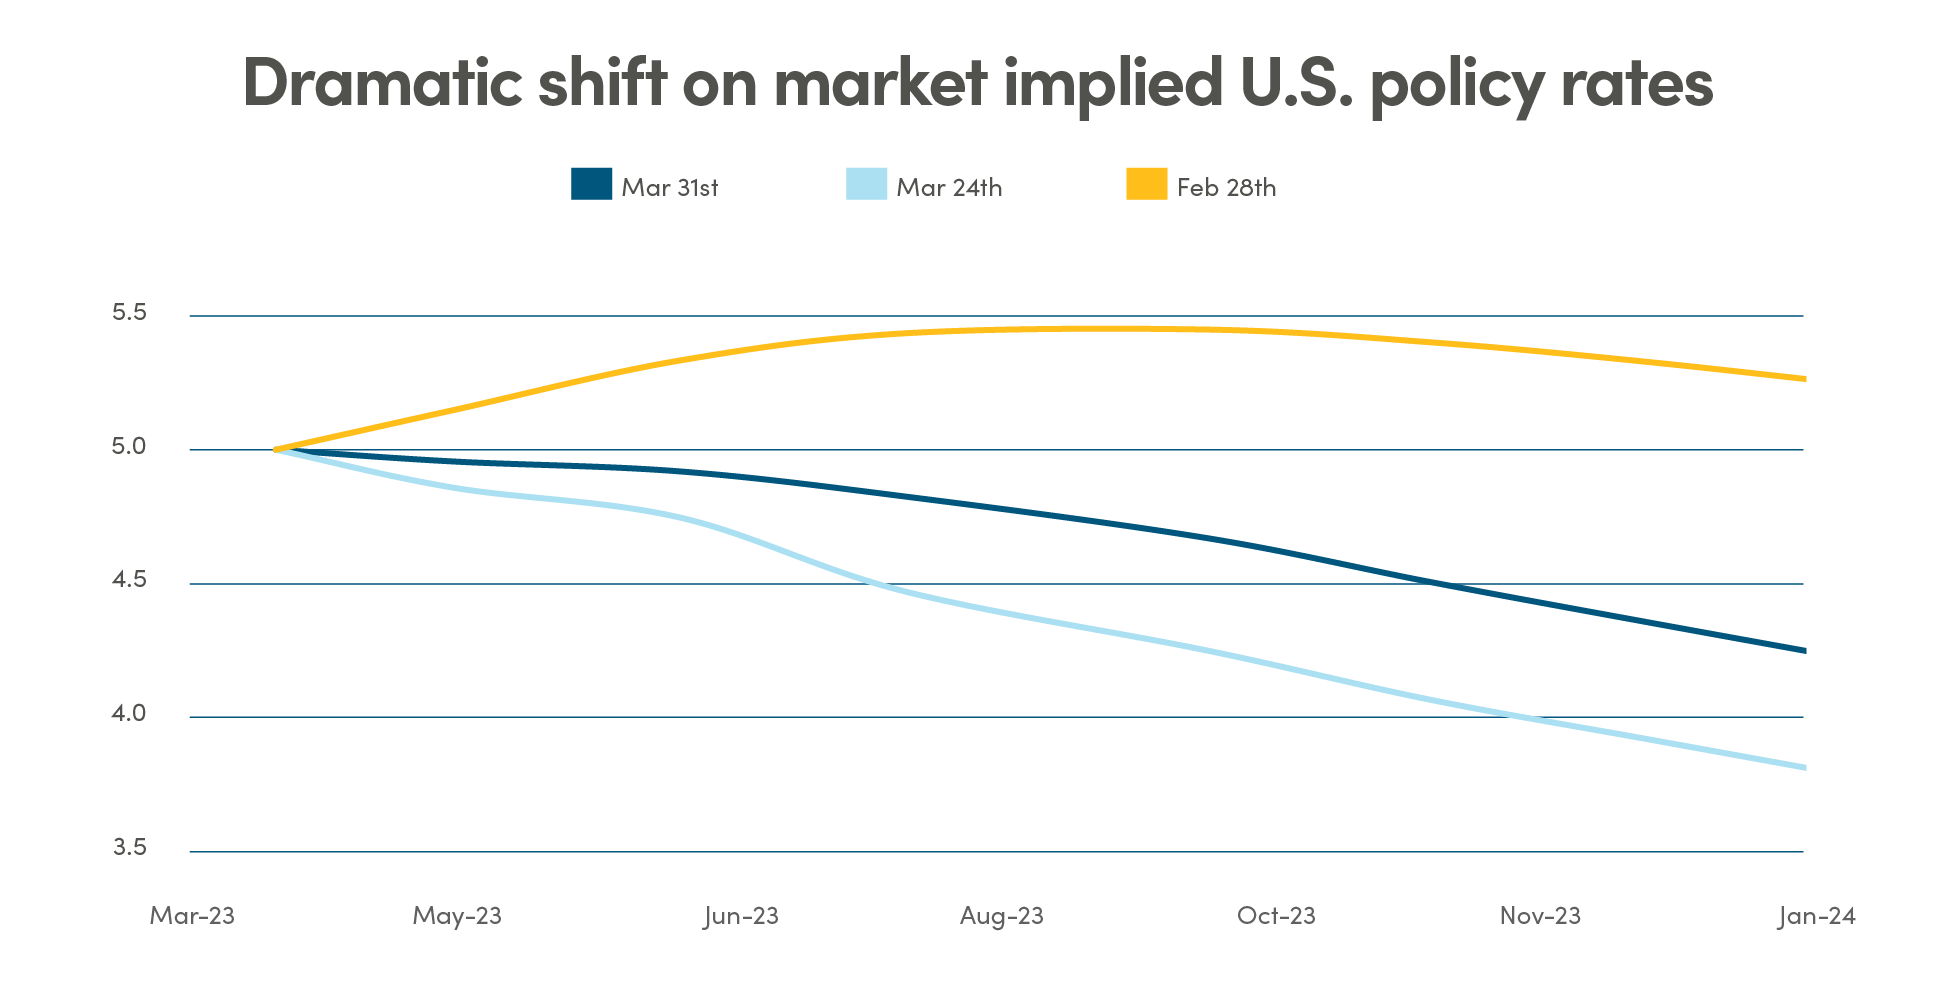 Line graph showing dramatic shift on market implied US policy rates, projections from March 2023 to January 2024.